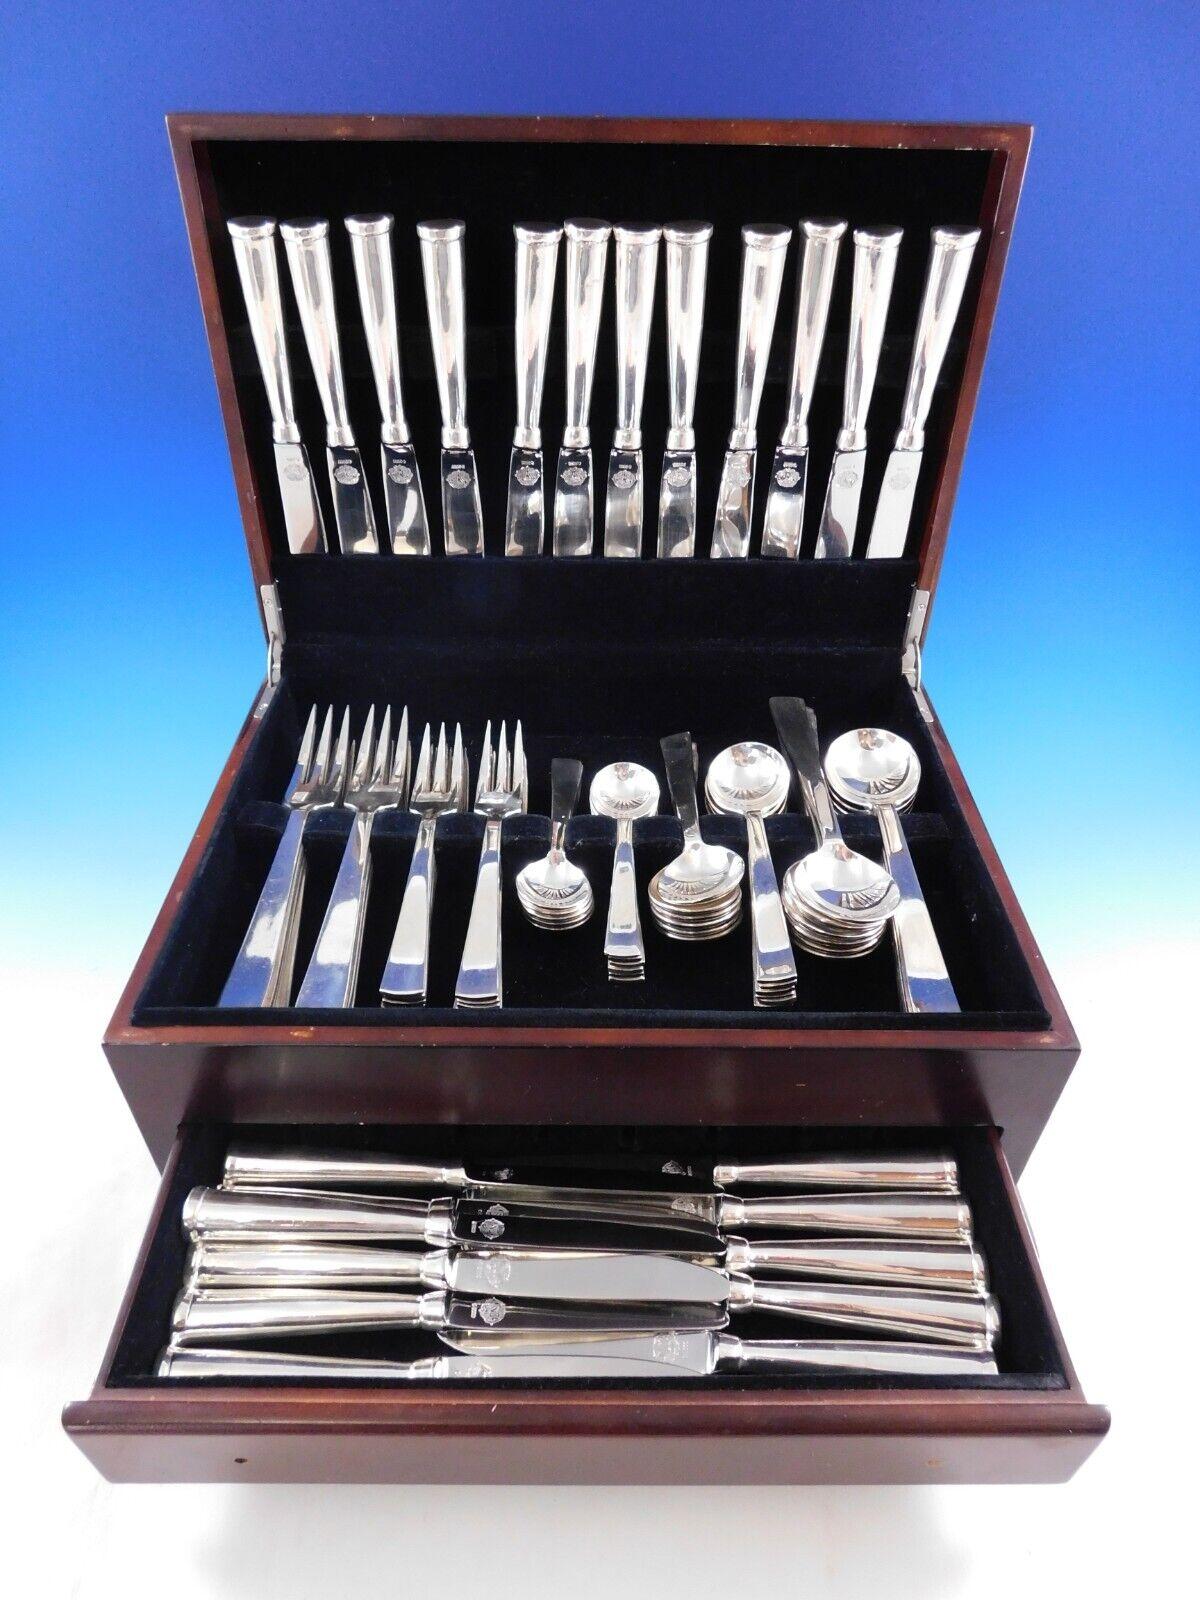 Augustus by Source Perrier Collection (India) Silverplate Flatware set with modern unadorned design - 82 pieces. This set includes:



12 Dinner Knives, 9 1/4